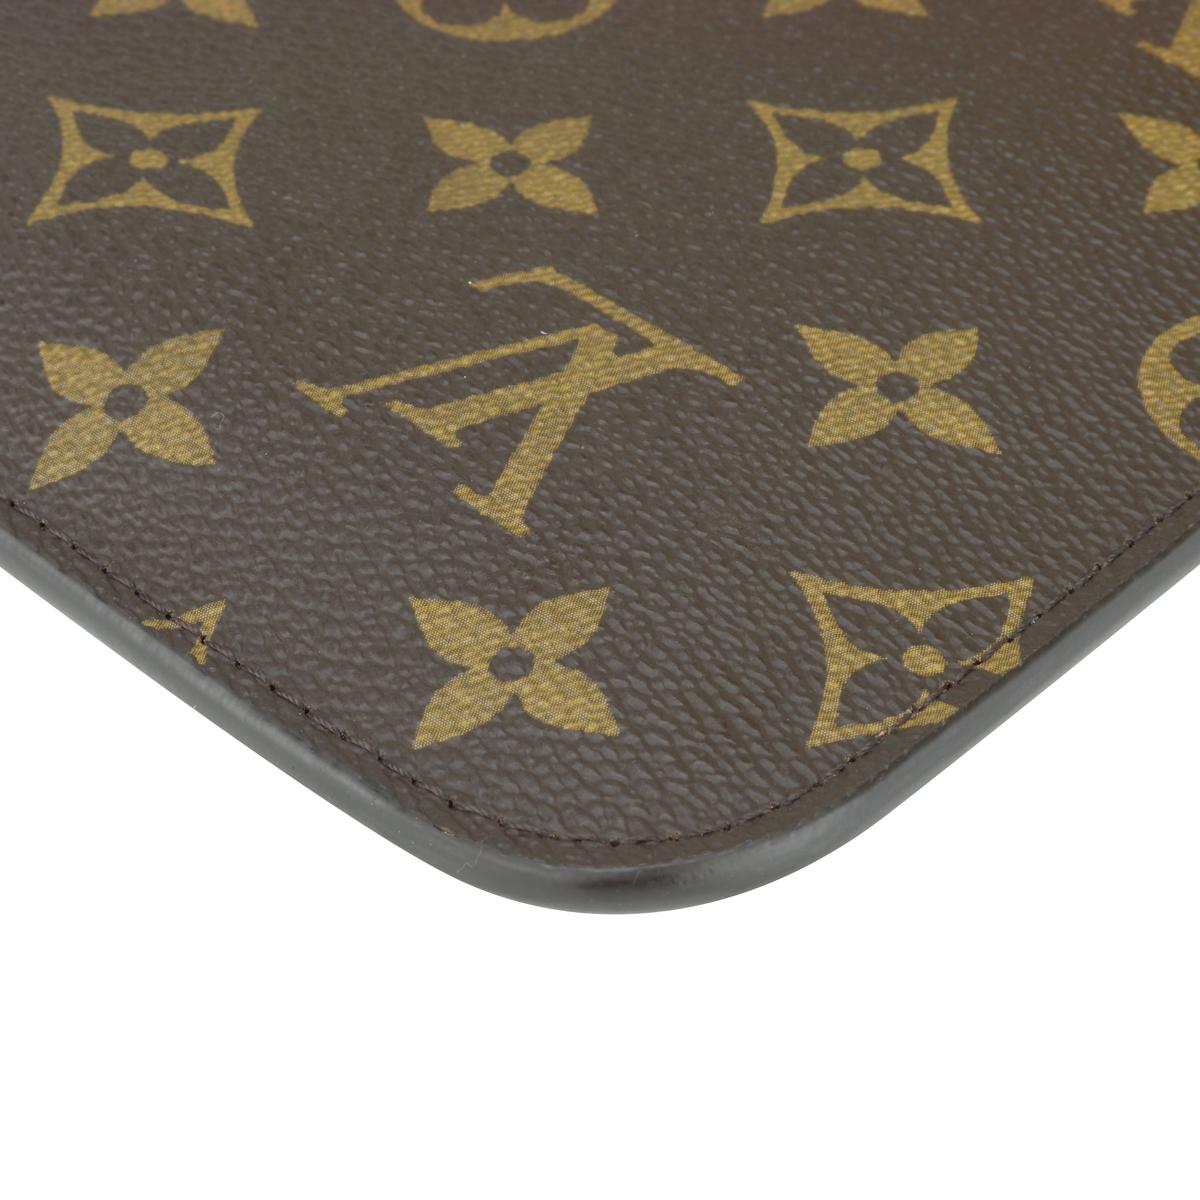 Louis Vuitton Neverfull MM Pochette Pouch in Monogram with Red Interior 2020 3